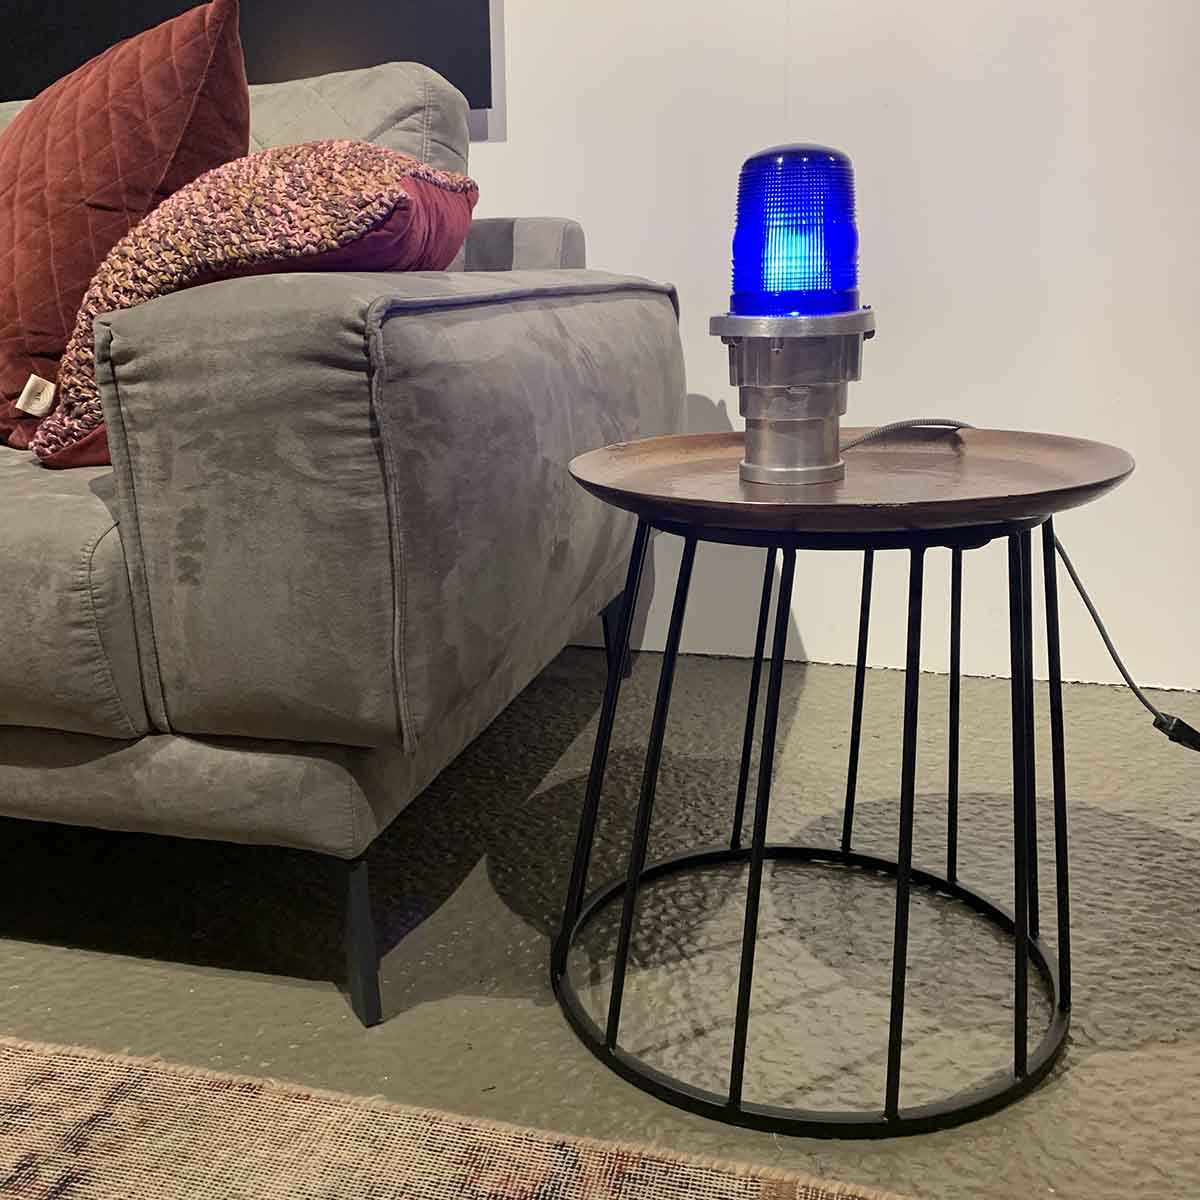 Stripped taxiway light on a side table.